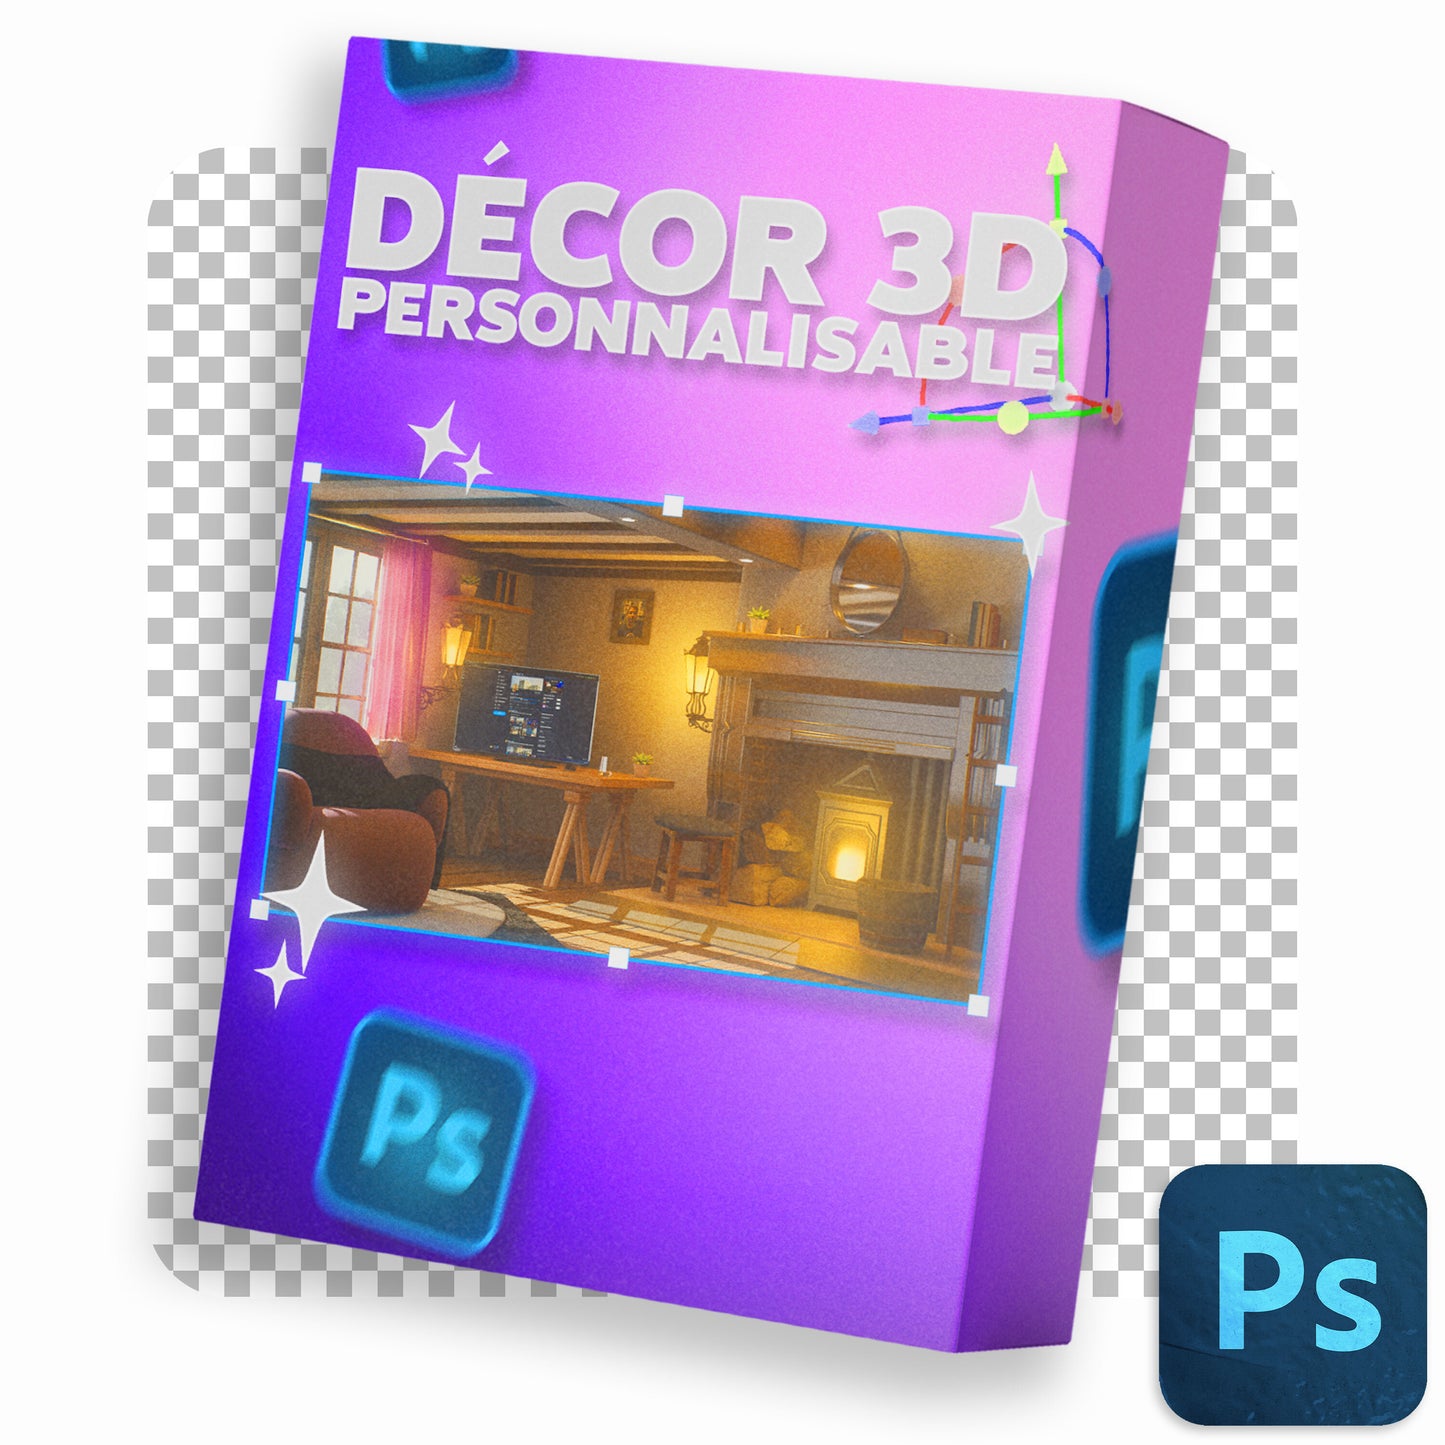 DÉCOR 3D PERSONNALISABLE - STREAMING, MEETINGS - VOL.01